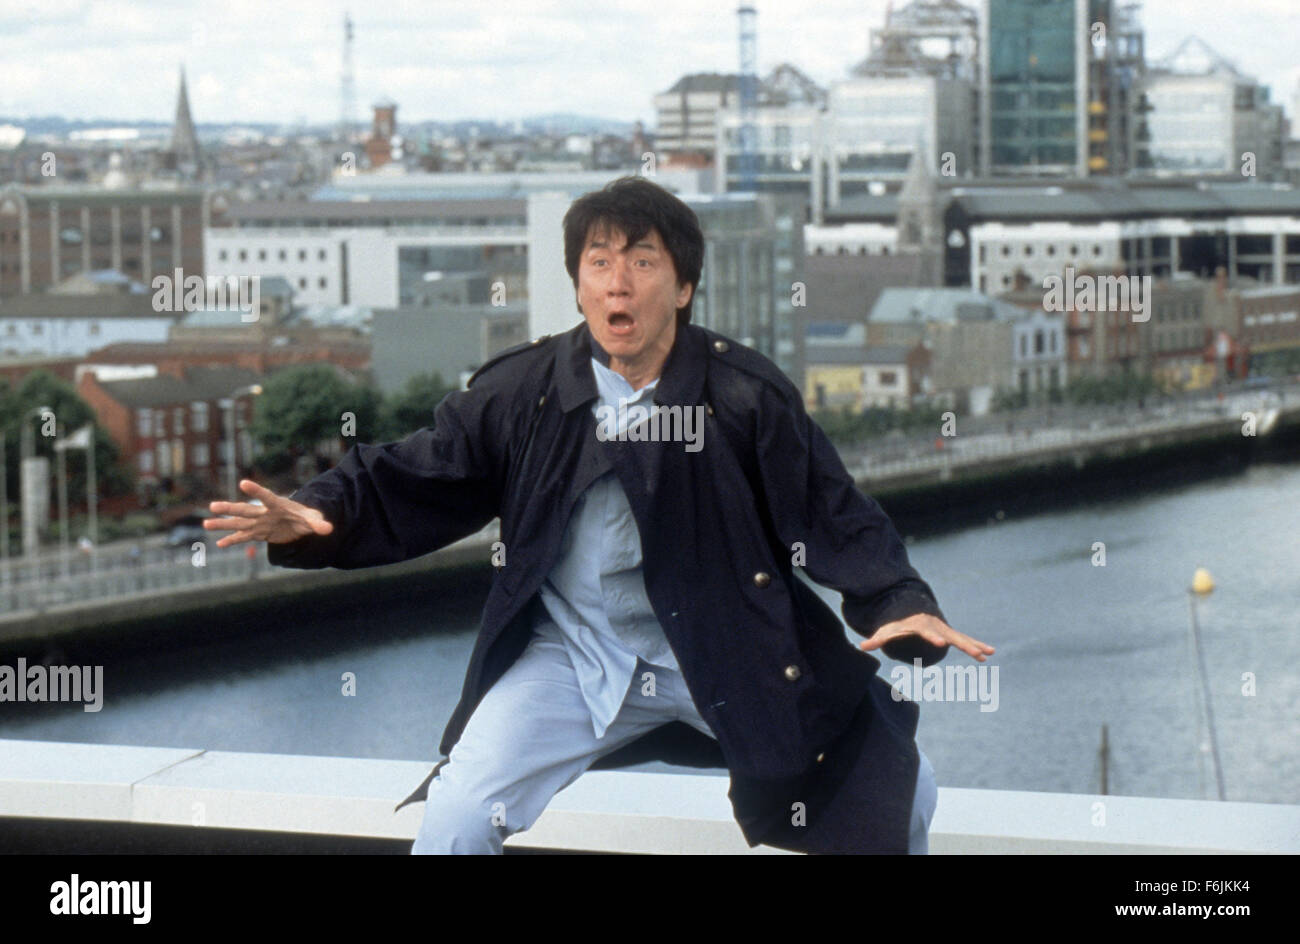 Jun 13, 2004; Hollywood, CA, USA; JACKIE CHAN as Eddie Yang in 'The Medallion' directed by Gordon Chan. Stock Photo